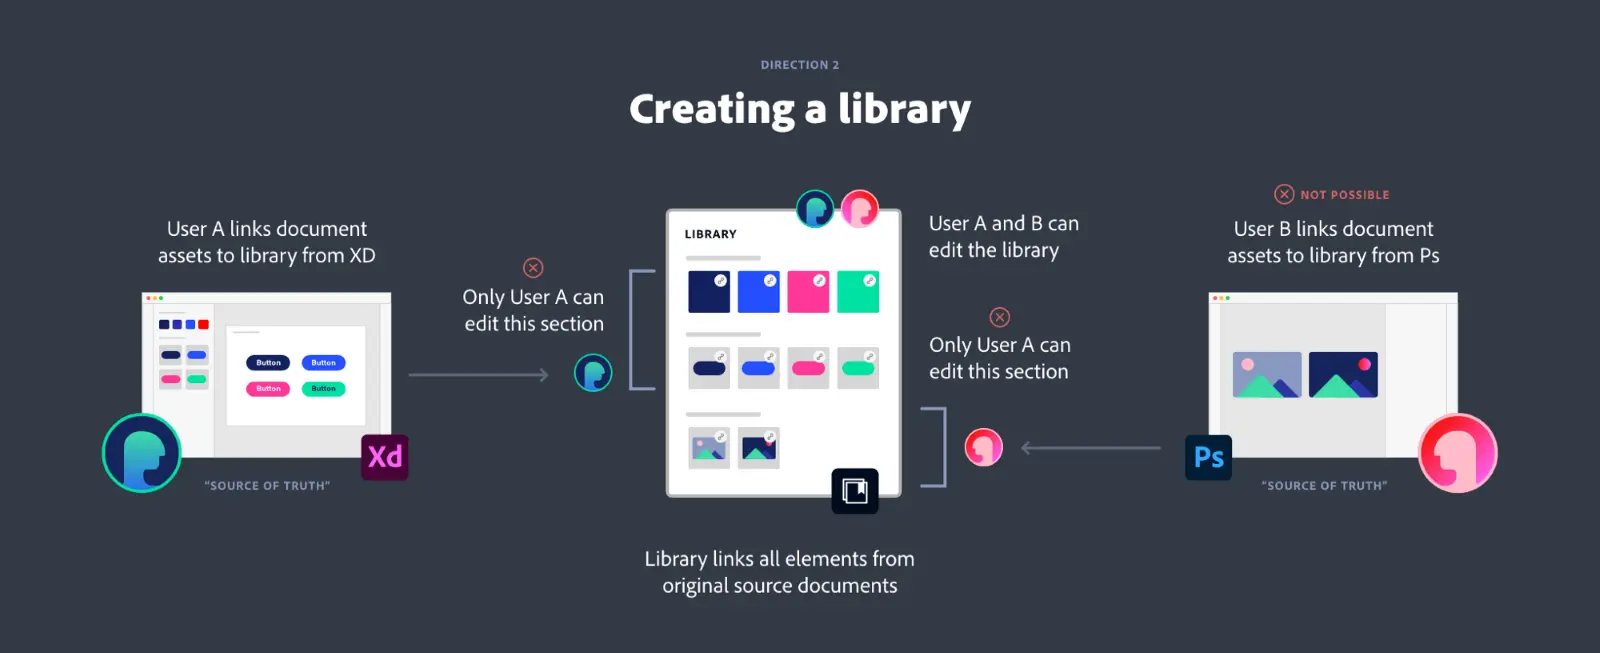 Diagram shows User A linking elements to a library from Adobe XD and User B linking elements to a library from Photoshop (User B has limited editing).